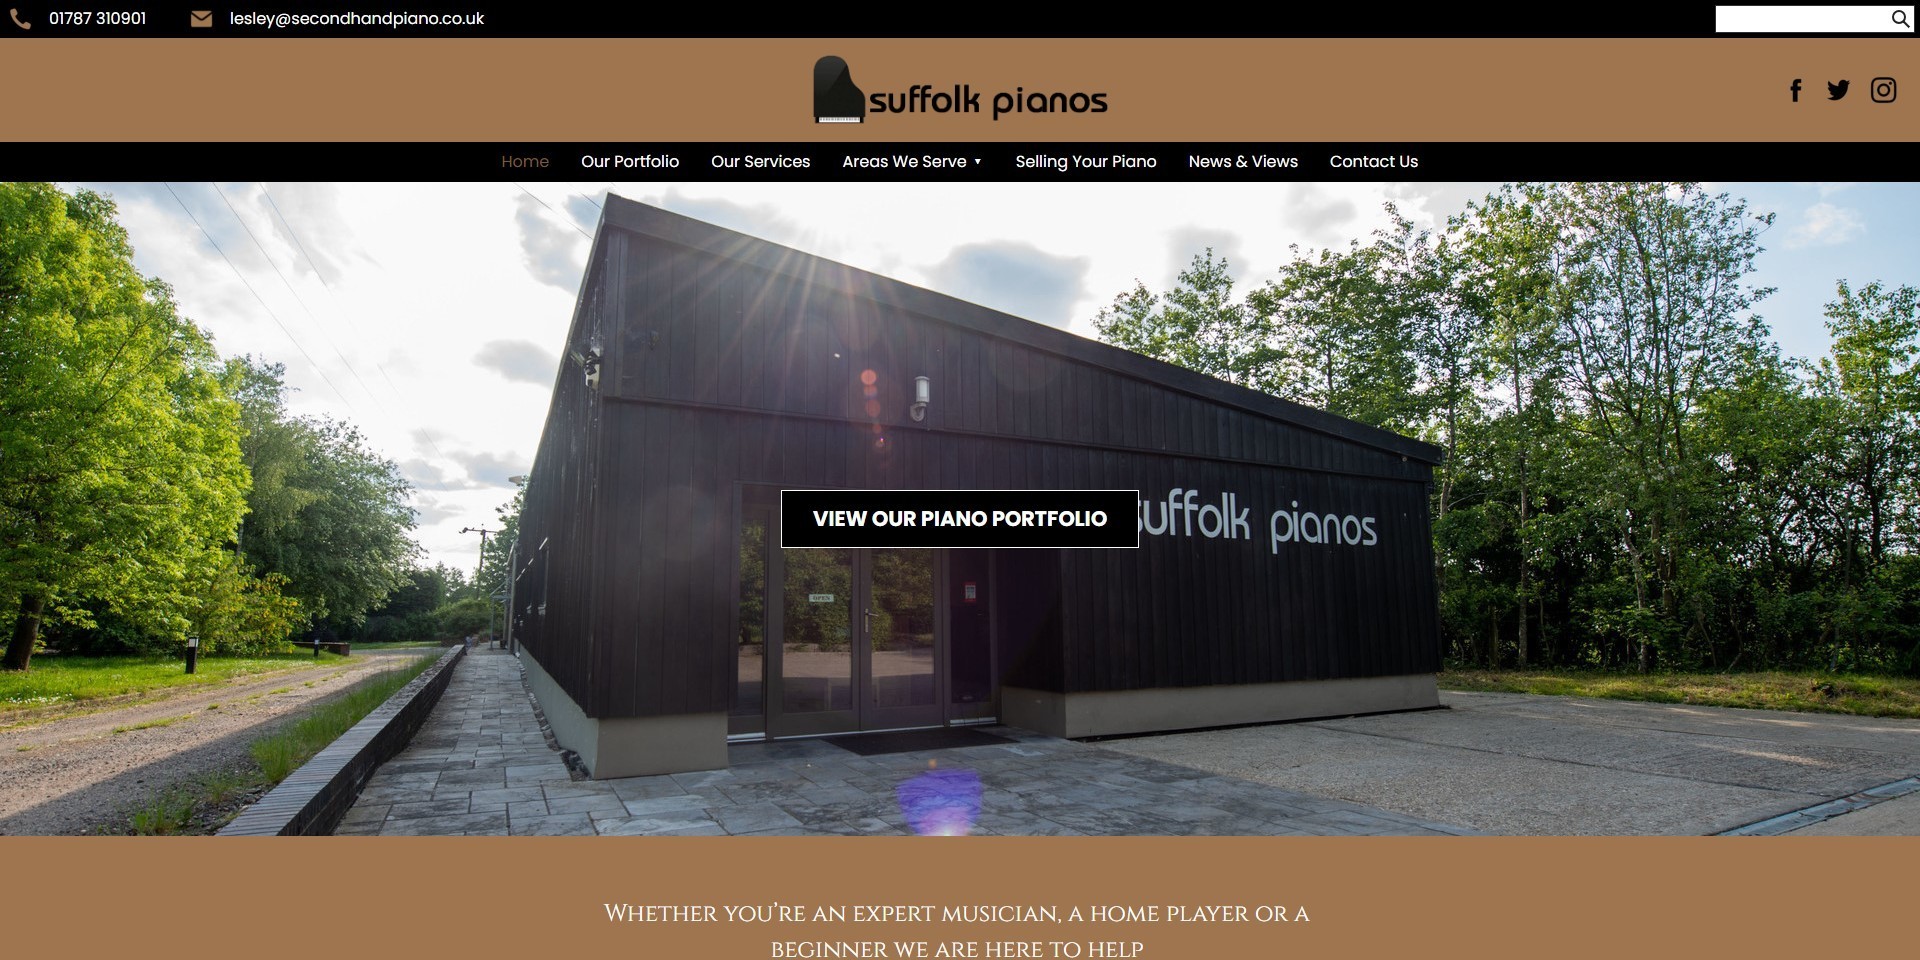 The new Suffolk Piano's website from it'seeze